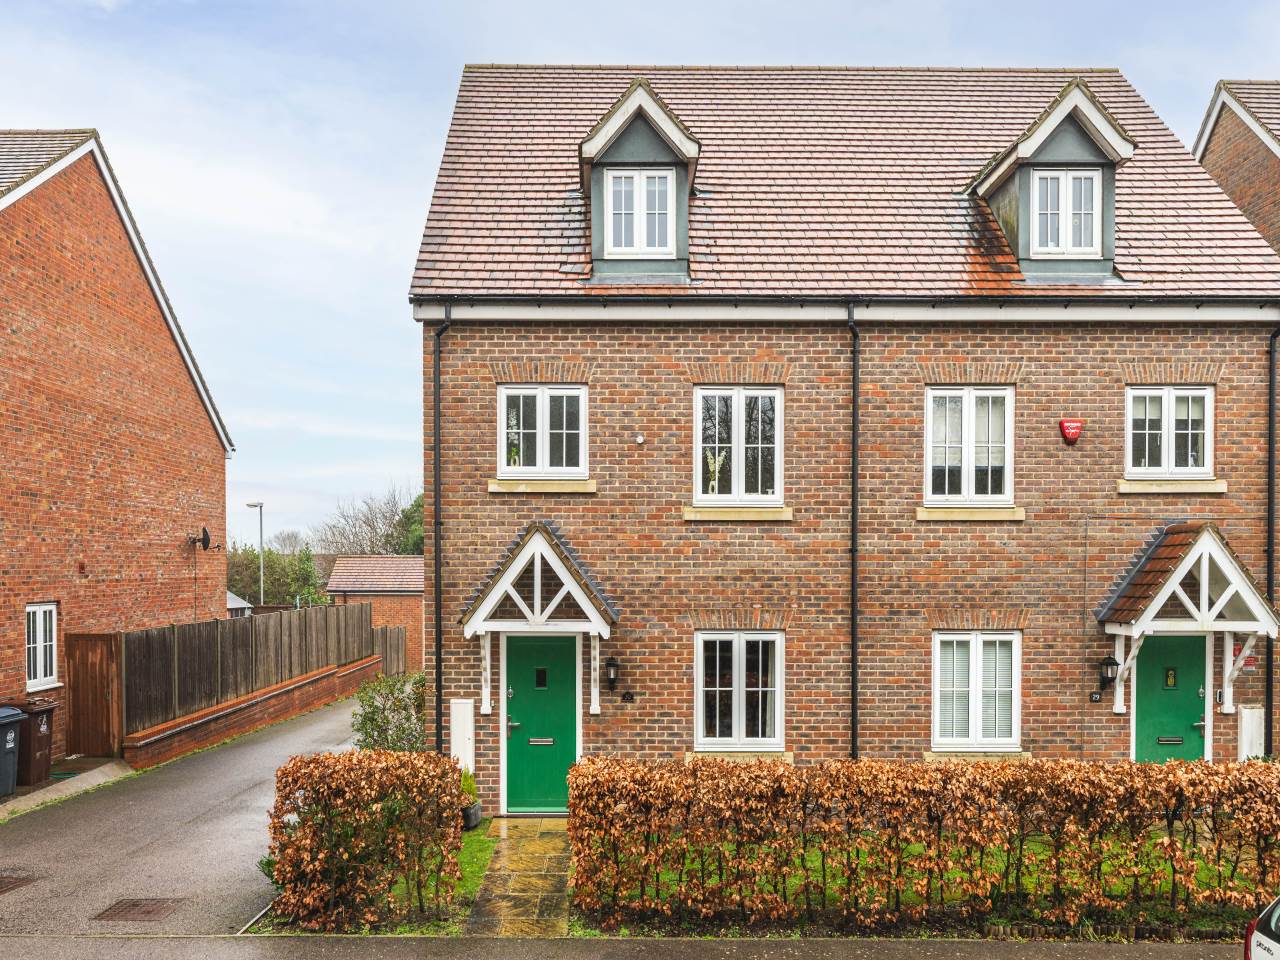 3 bed semi-detached house for sale in Skipps Meadow, Buntingford - Property Image 1